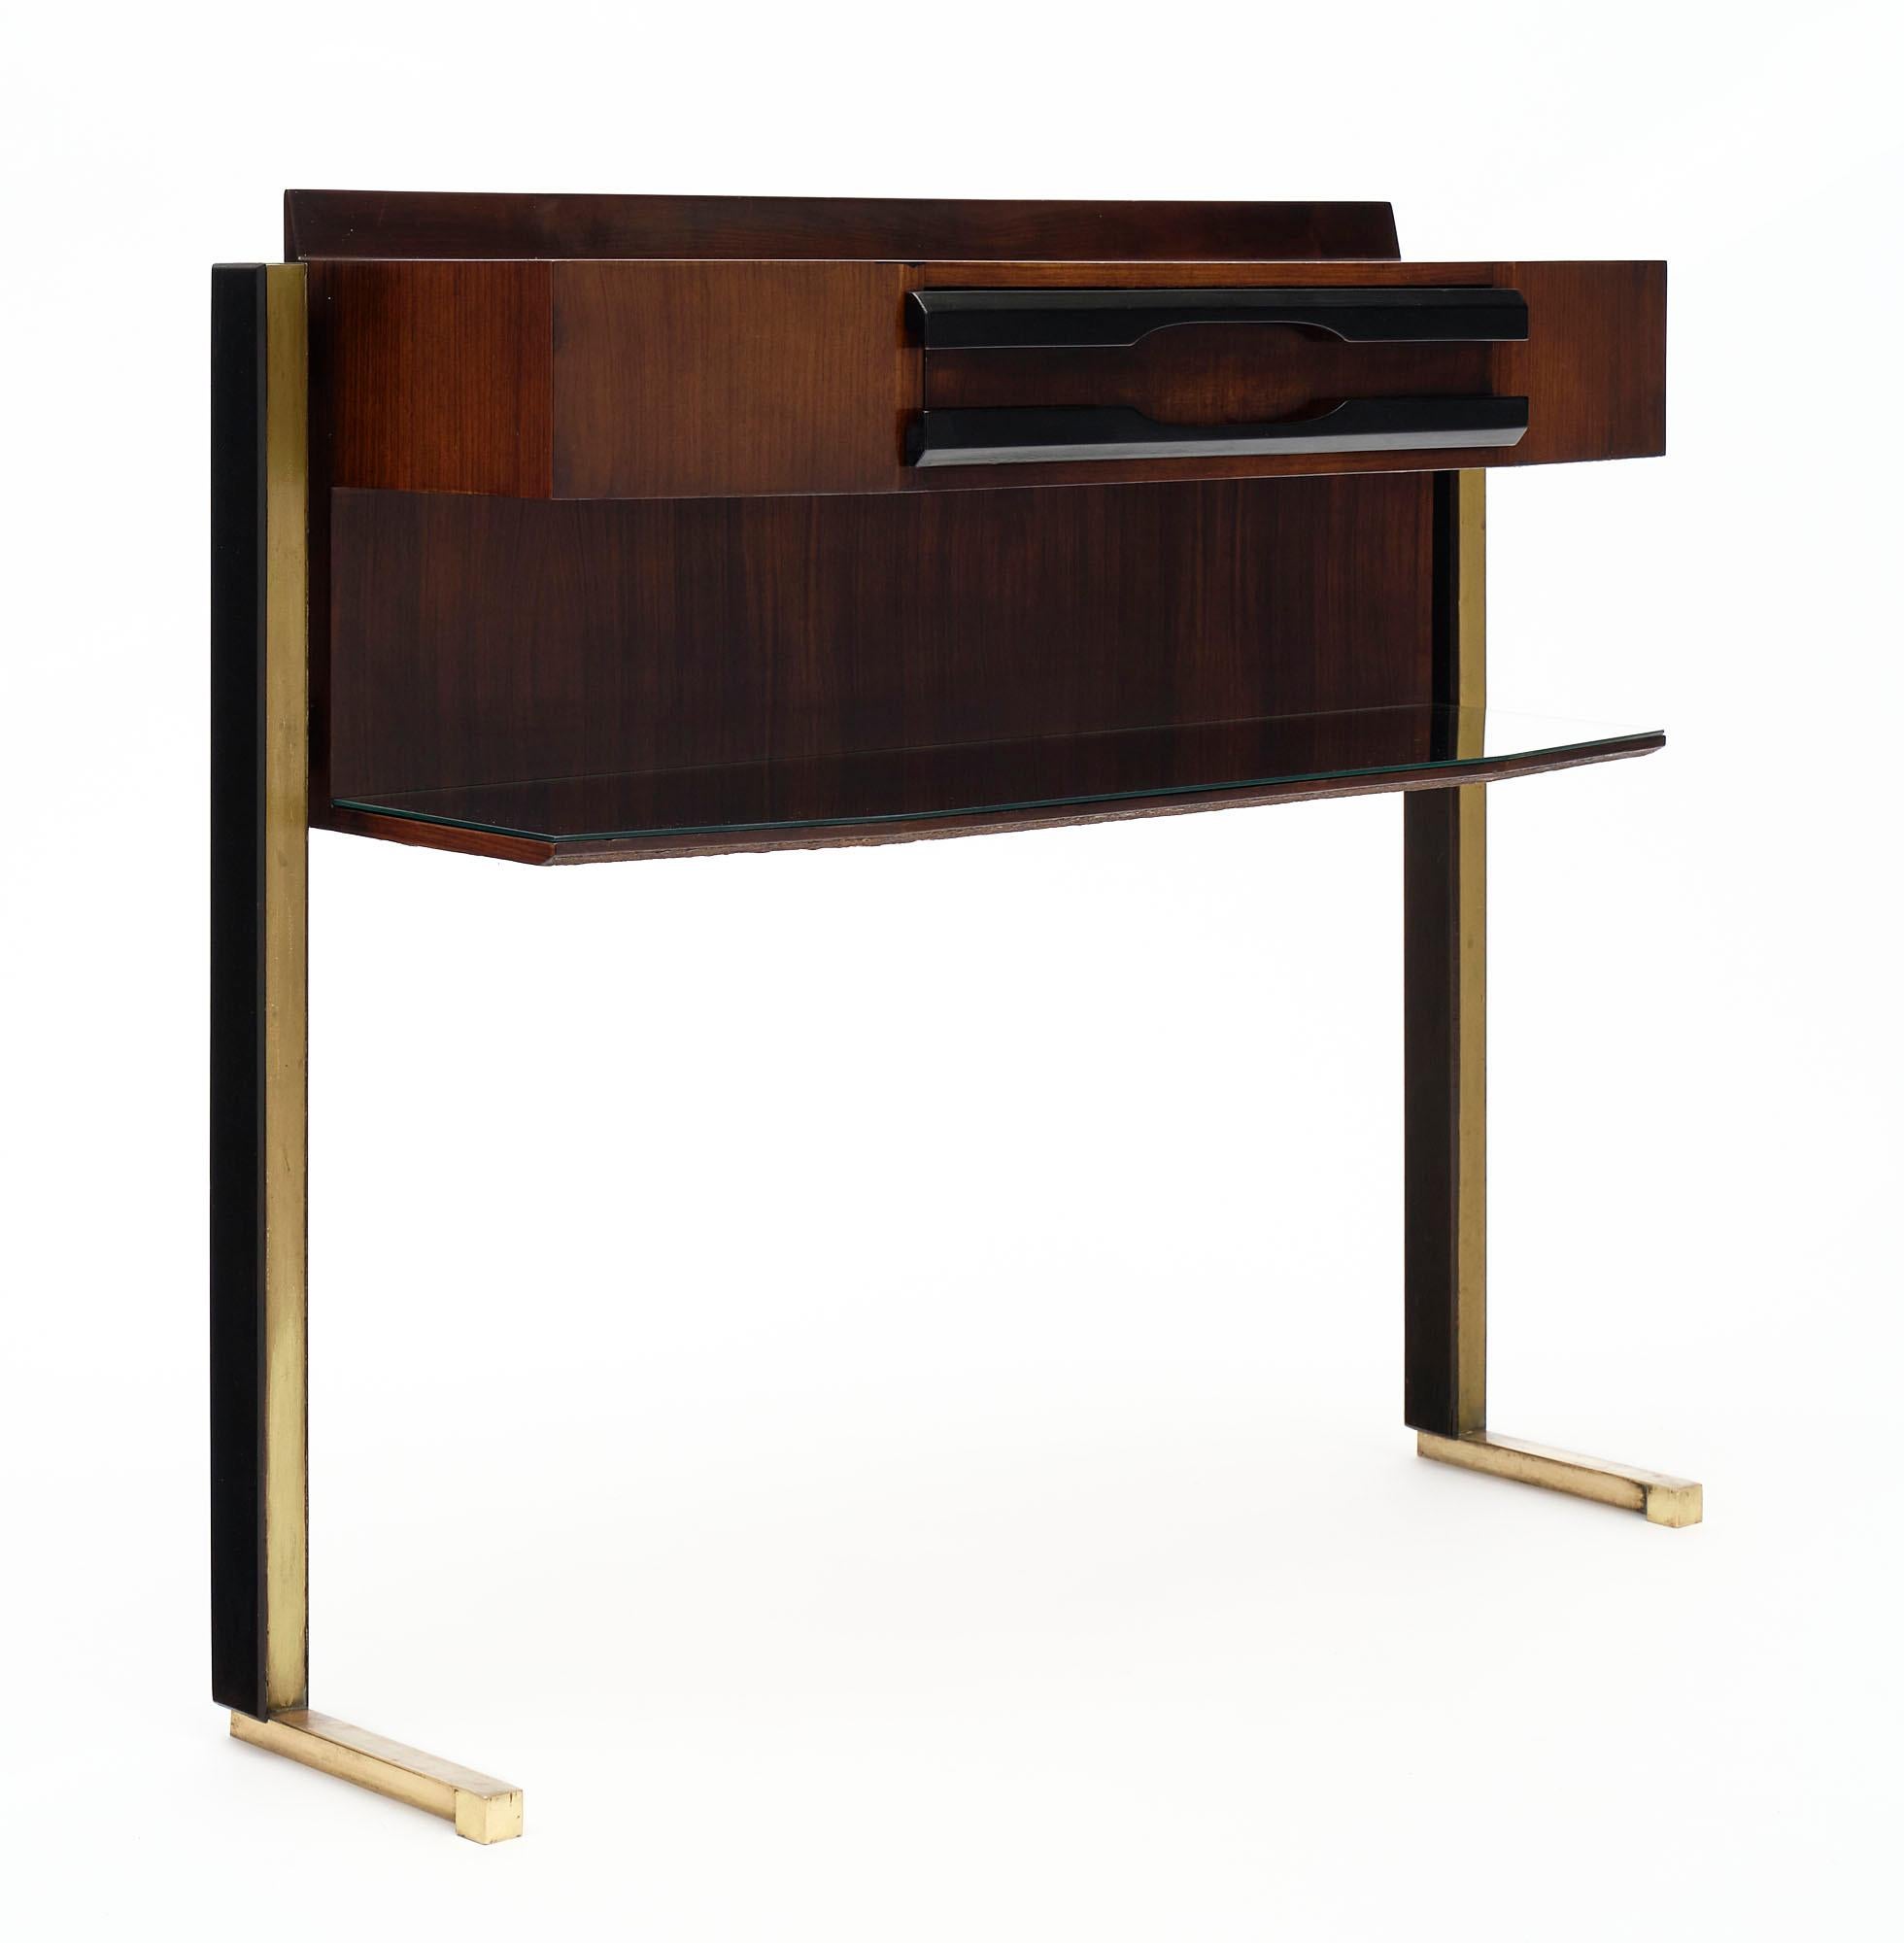 Console and mirror, Italian, made of Brazilian rosewood and ebonized rosewood. There is a mirror covered shelf and brass legs. This set is made by designer Carlo di Carli. A square frame holds a circular mirror above the console. We love this set.